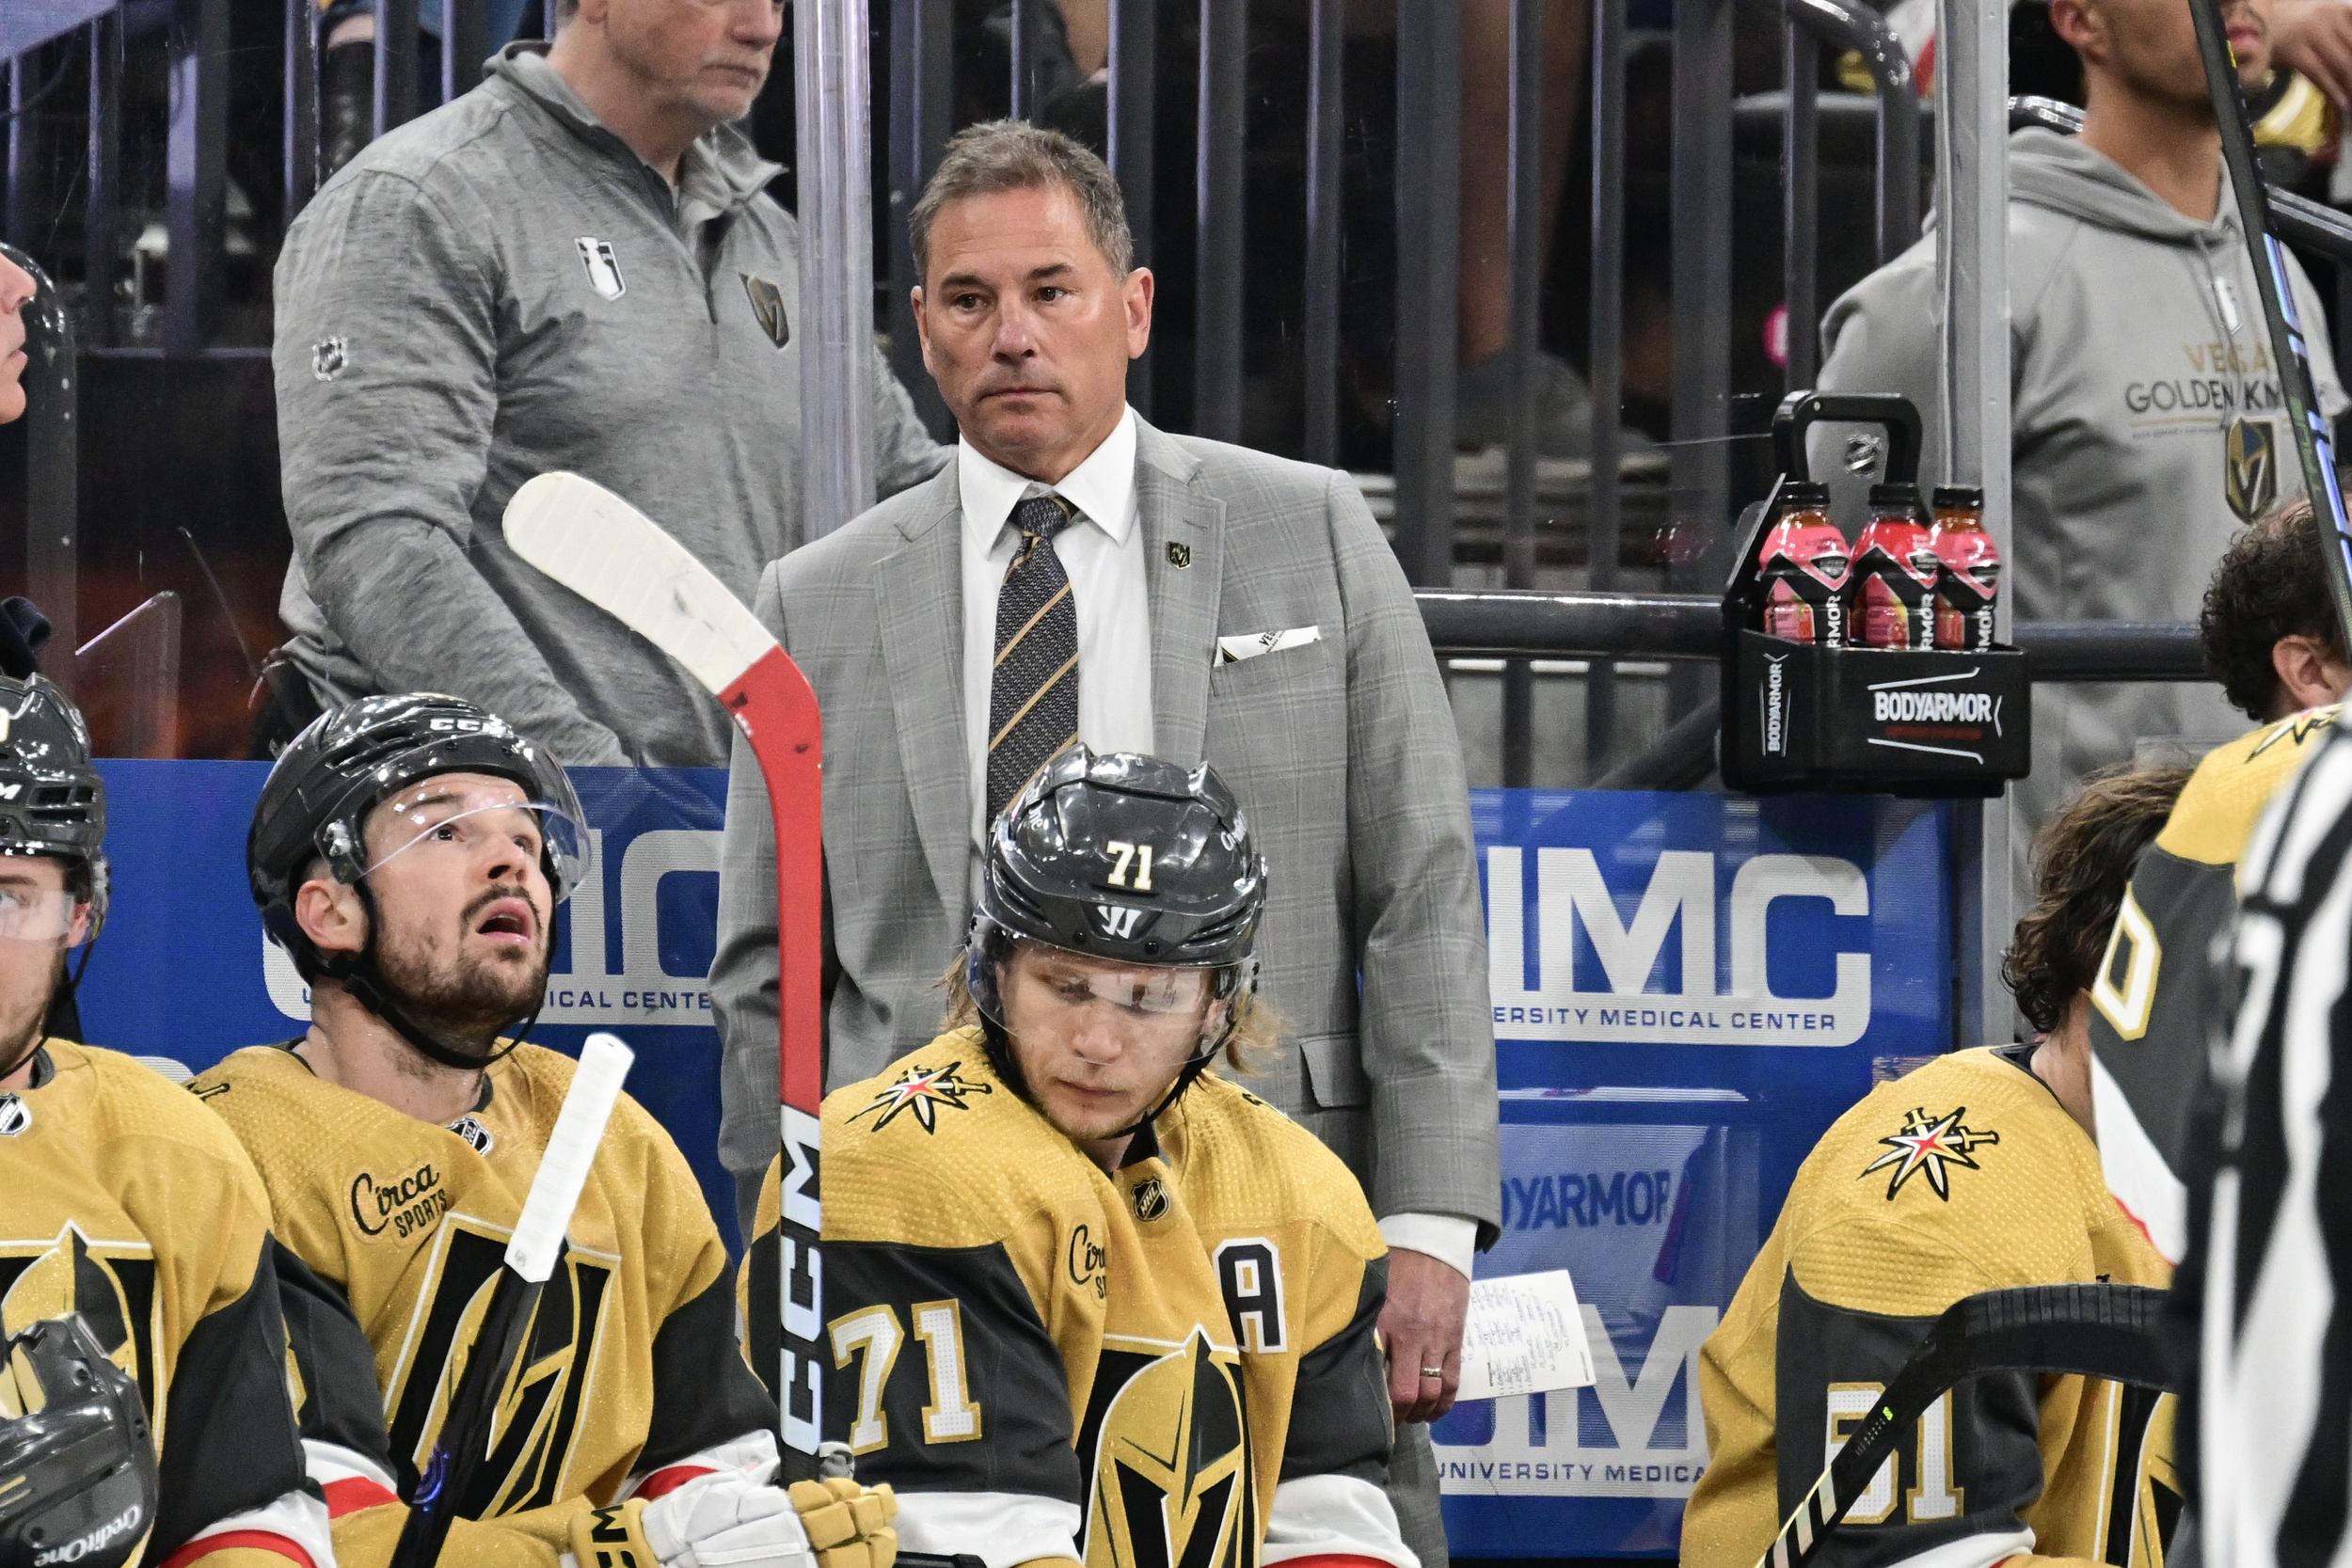 golden knights hc reacts to alex pietrangelo's costly penalty in game 5 loss